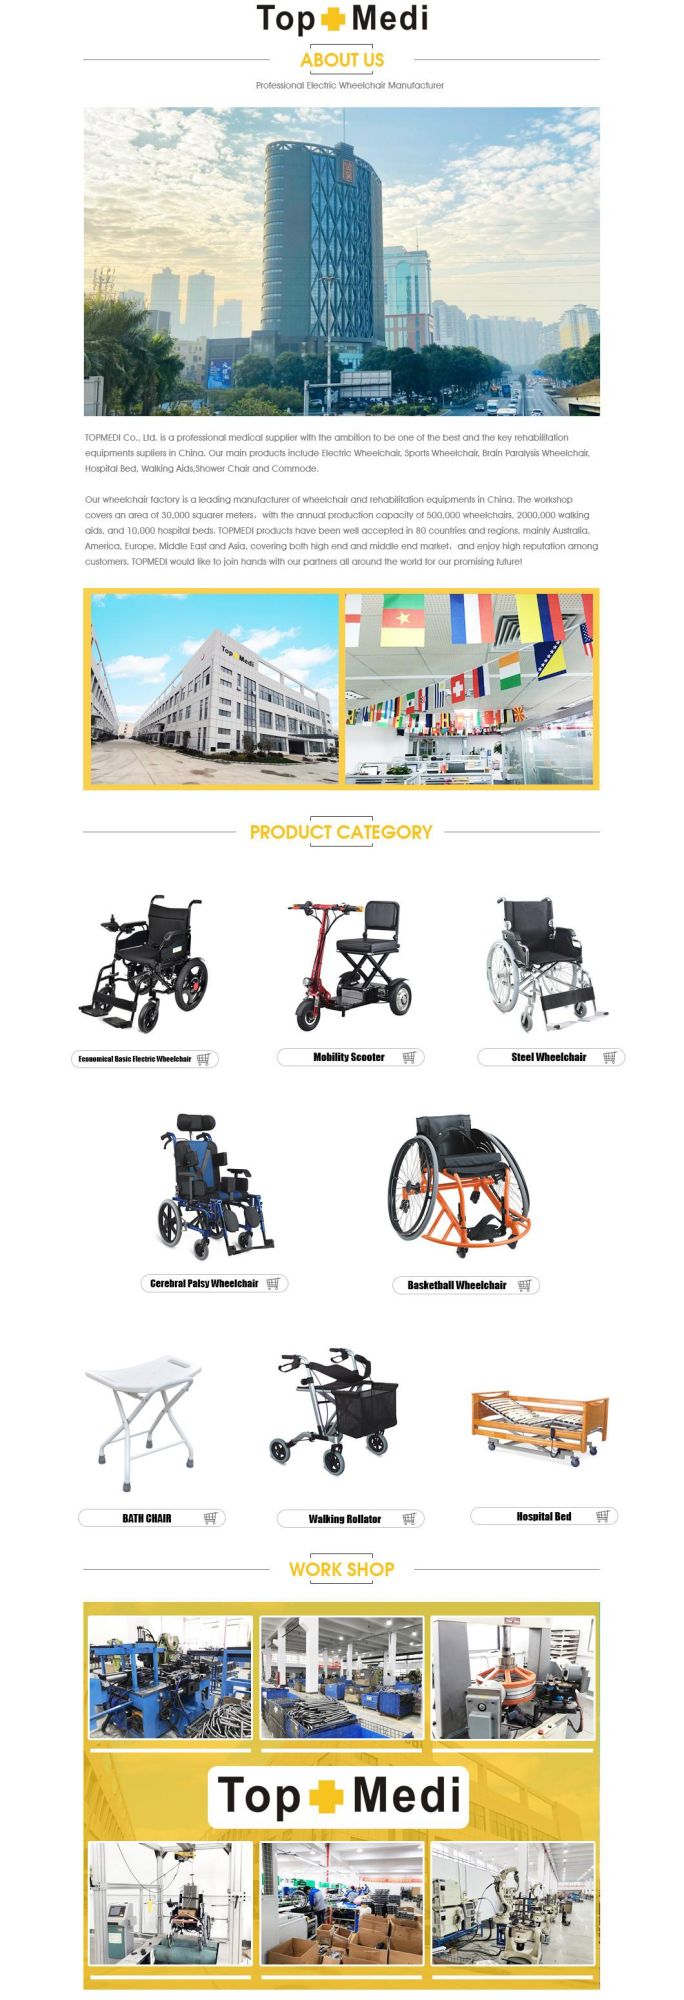 ISO Approved Elderly Bath Toilet Wheel Shower Commode Wheelchair Transfer Chair in China